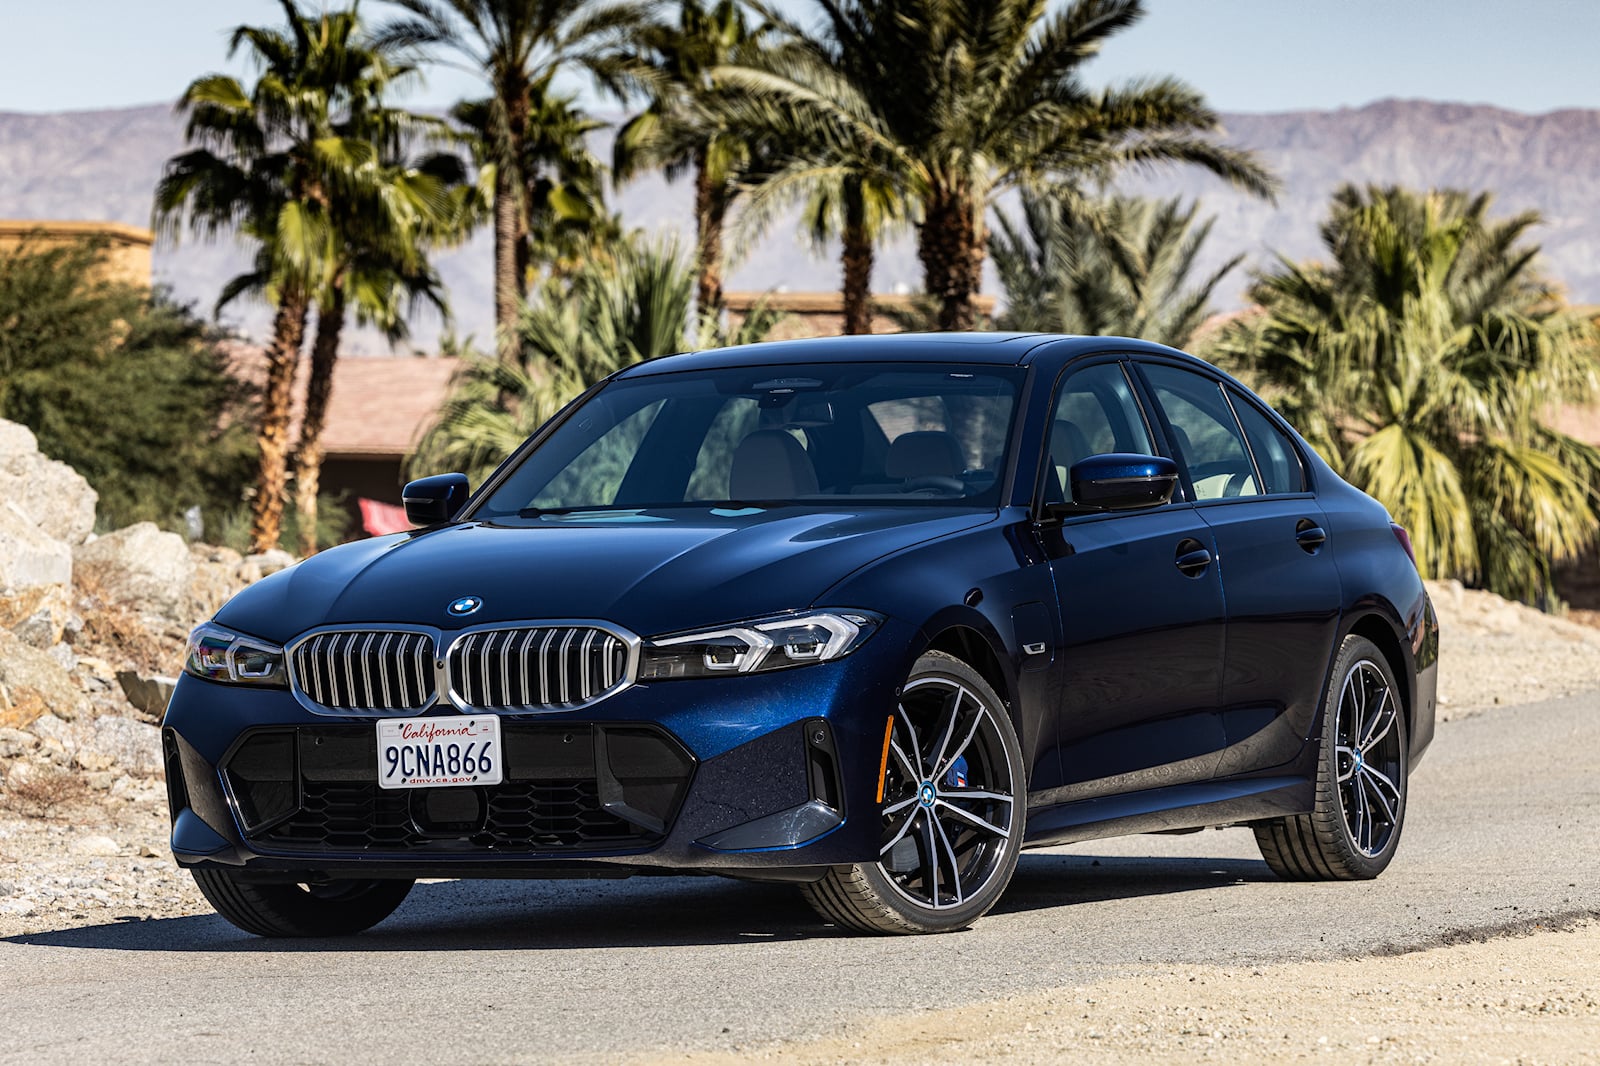 Download: Complete catalog for New BMW 3 Series Sedan